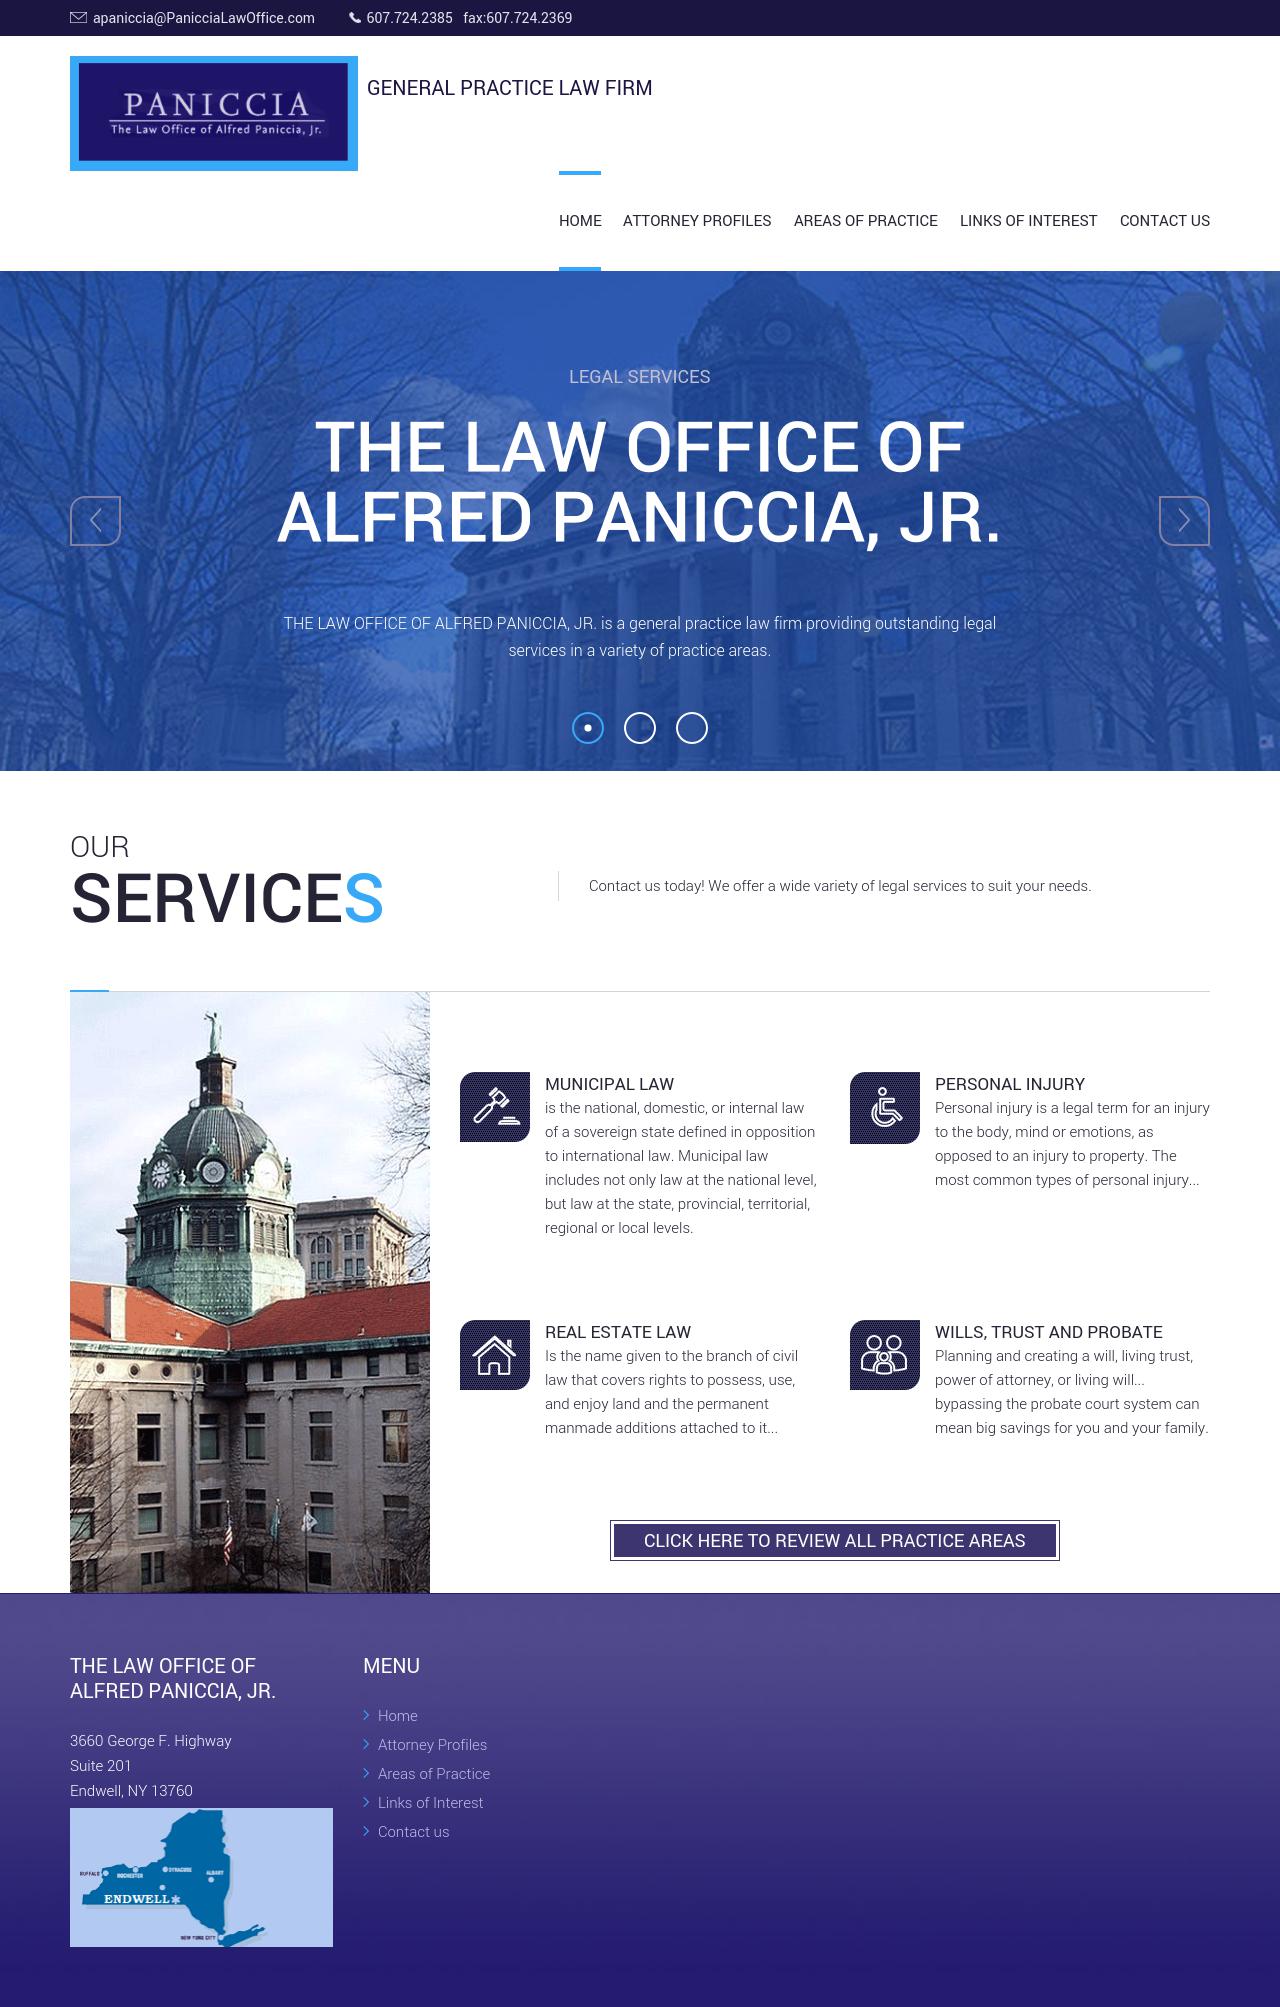 The Law Office of Alfred Paniccia, Jr. - Binghamton NY Lawyers